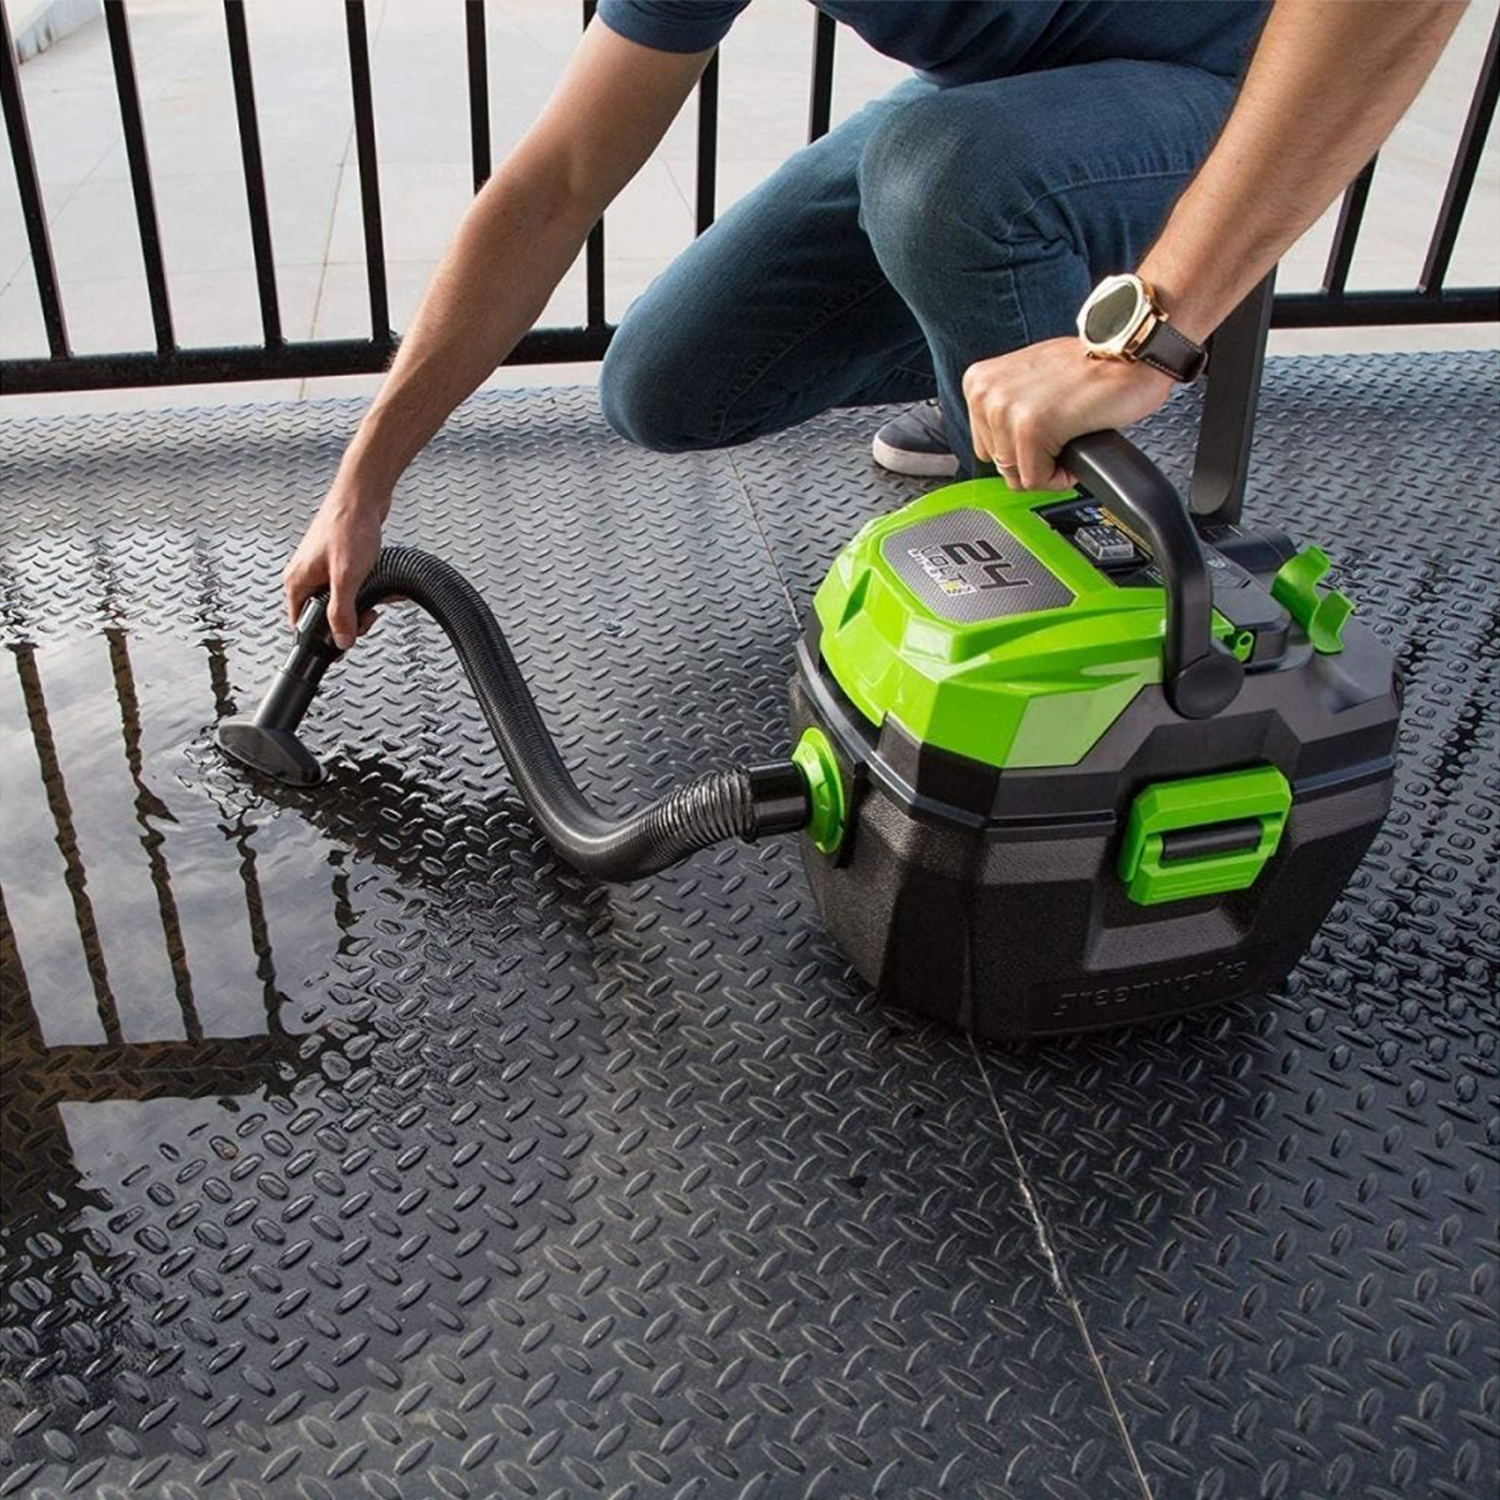 Greenworks 24V Cordless Gallon Wet Dry Shop Vacuum with 2.0 Ah Battery 